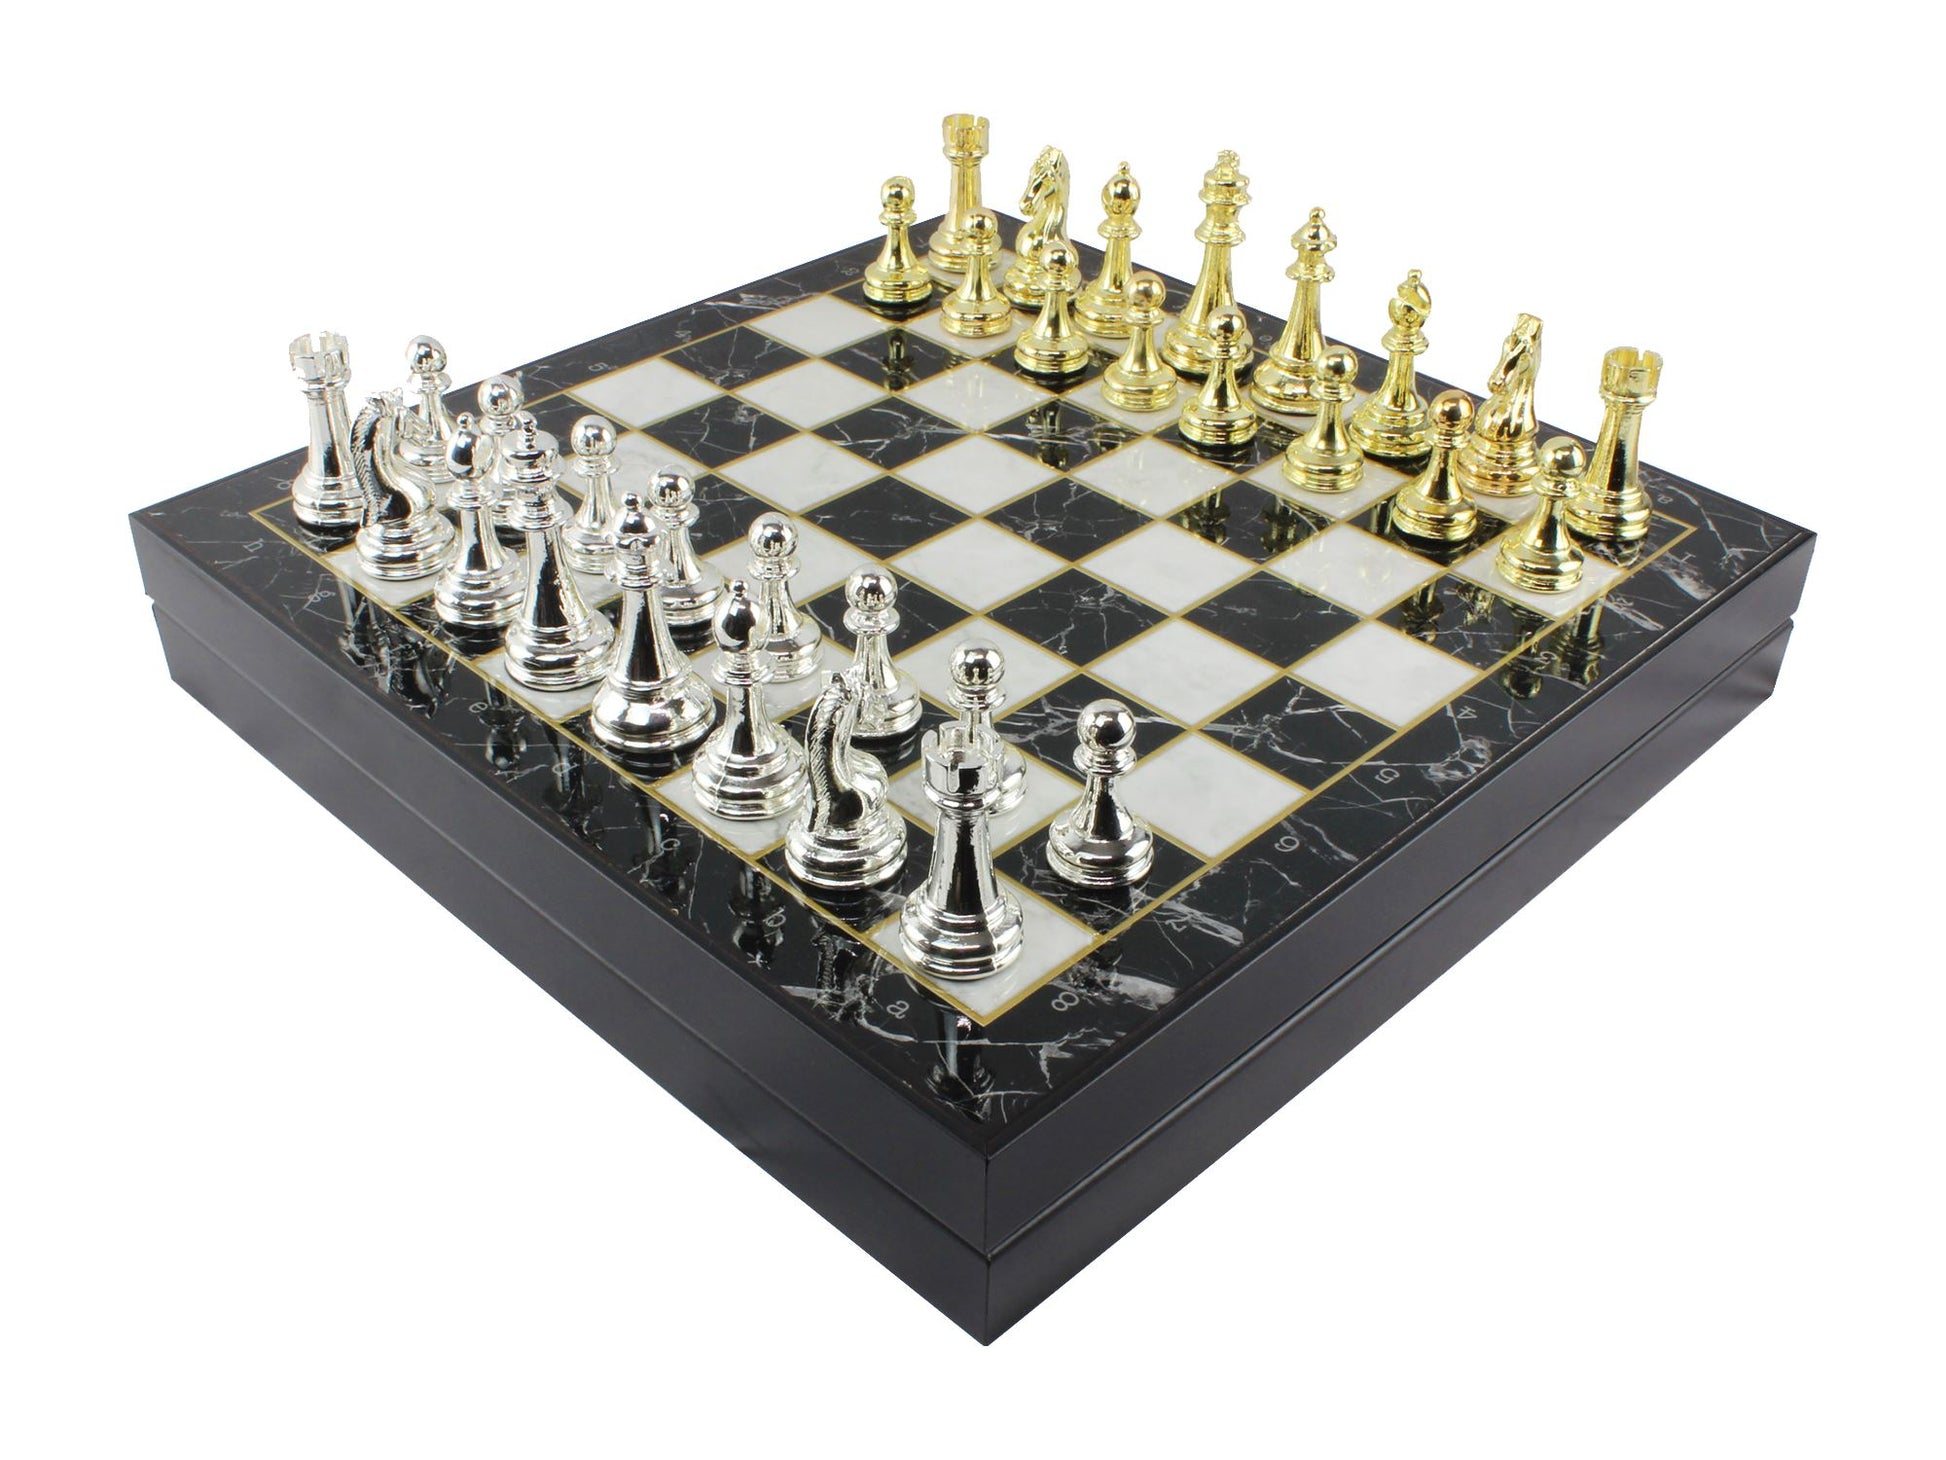 Luxury Marble Patterned Chess Box Set with Gold & Silver Colored Metal Staunton Chessmen